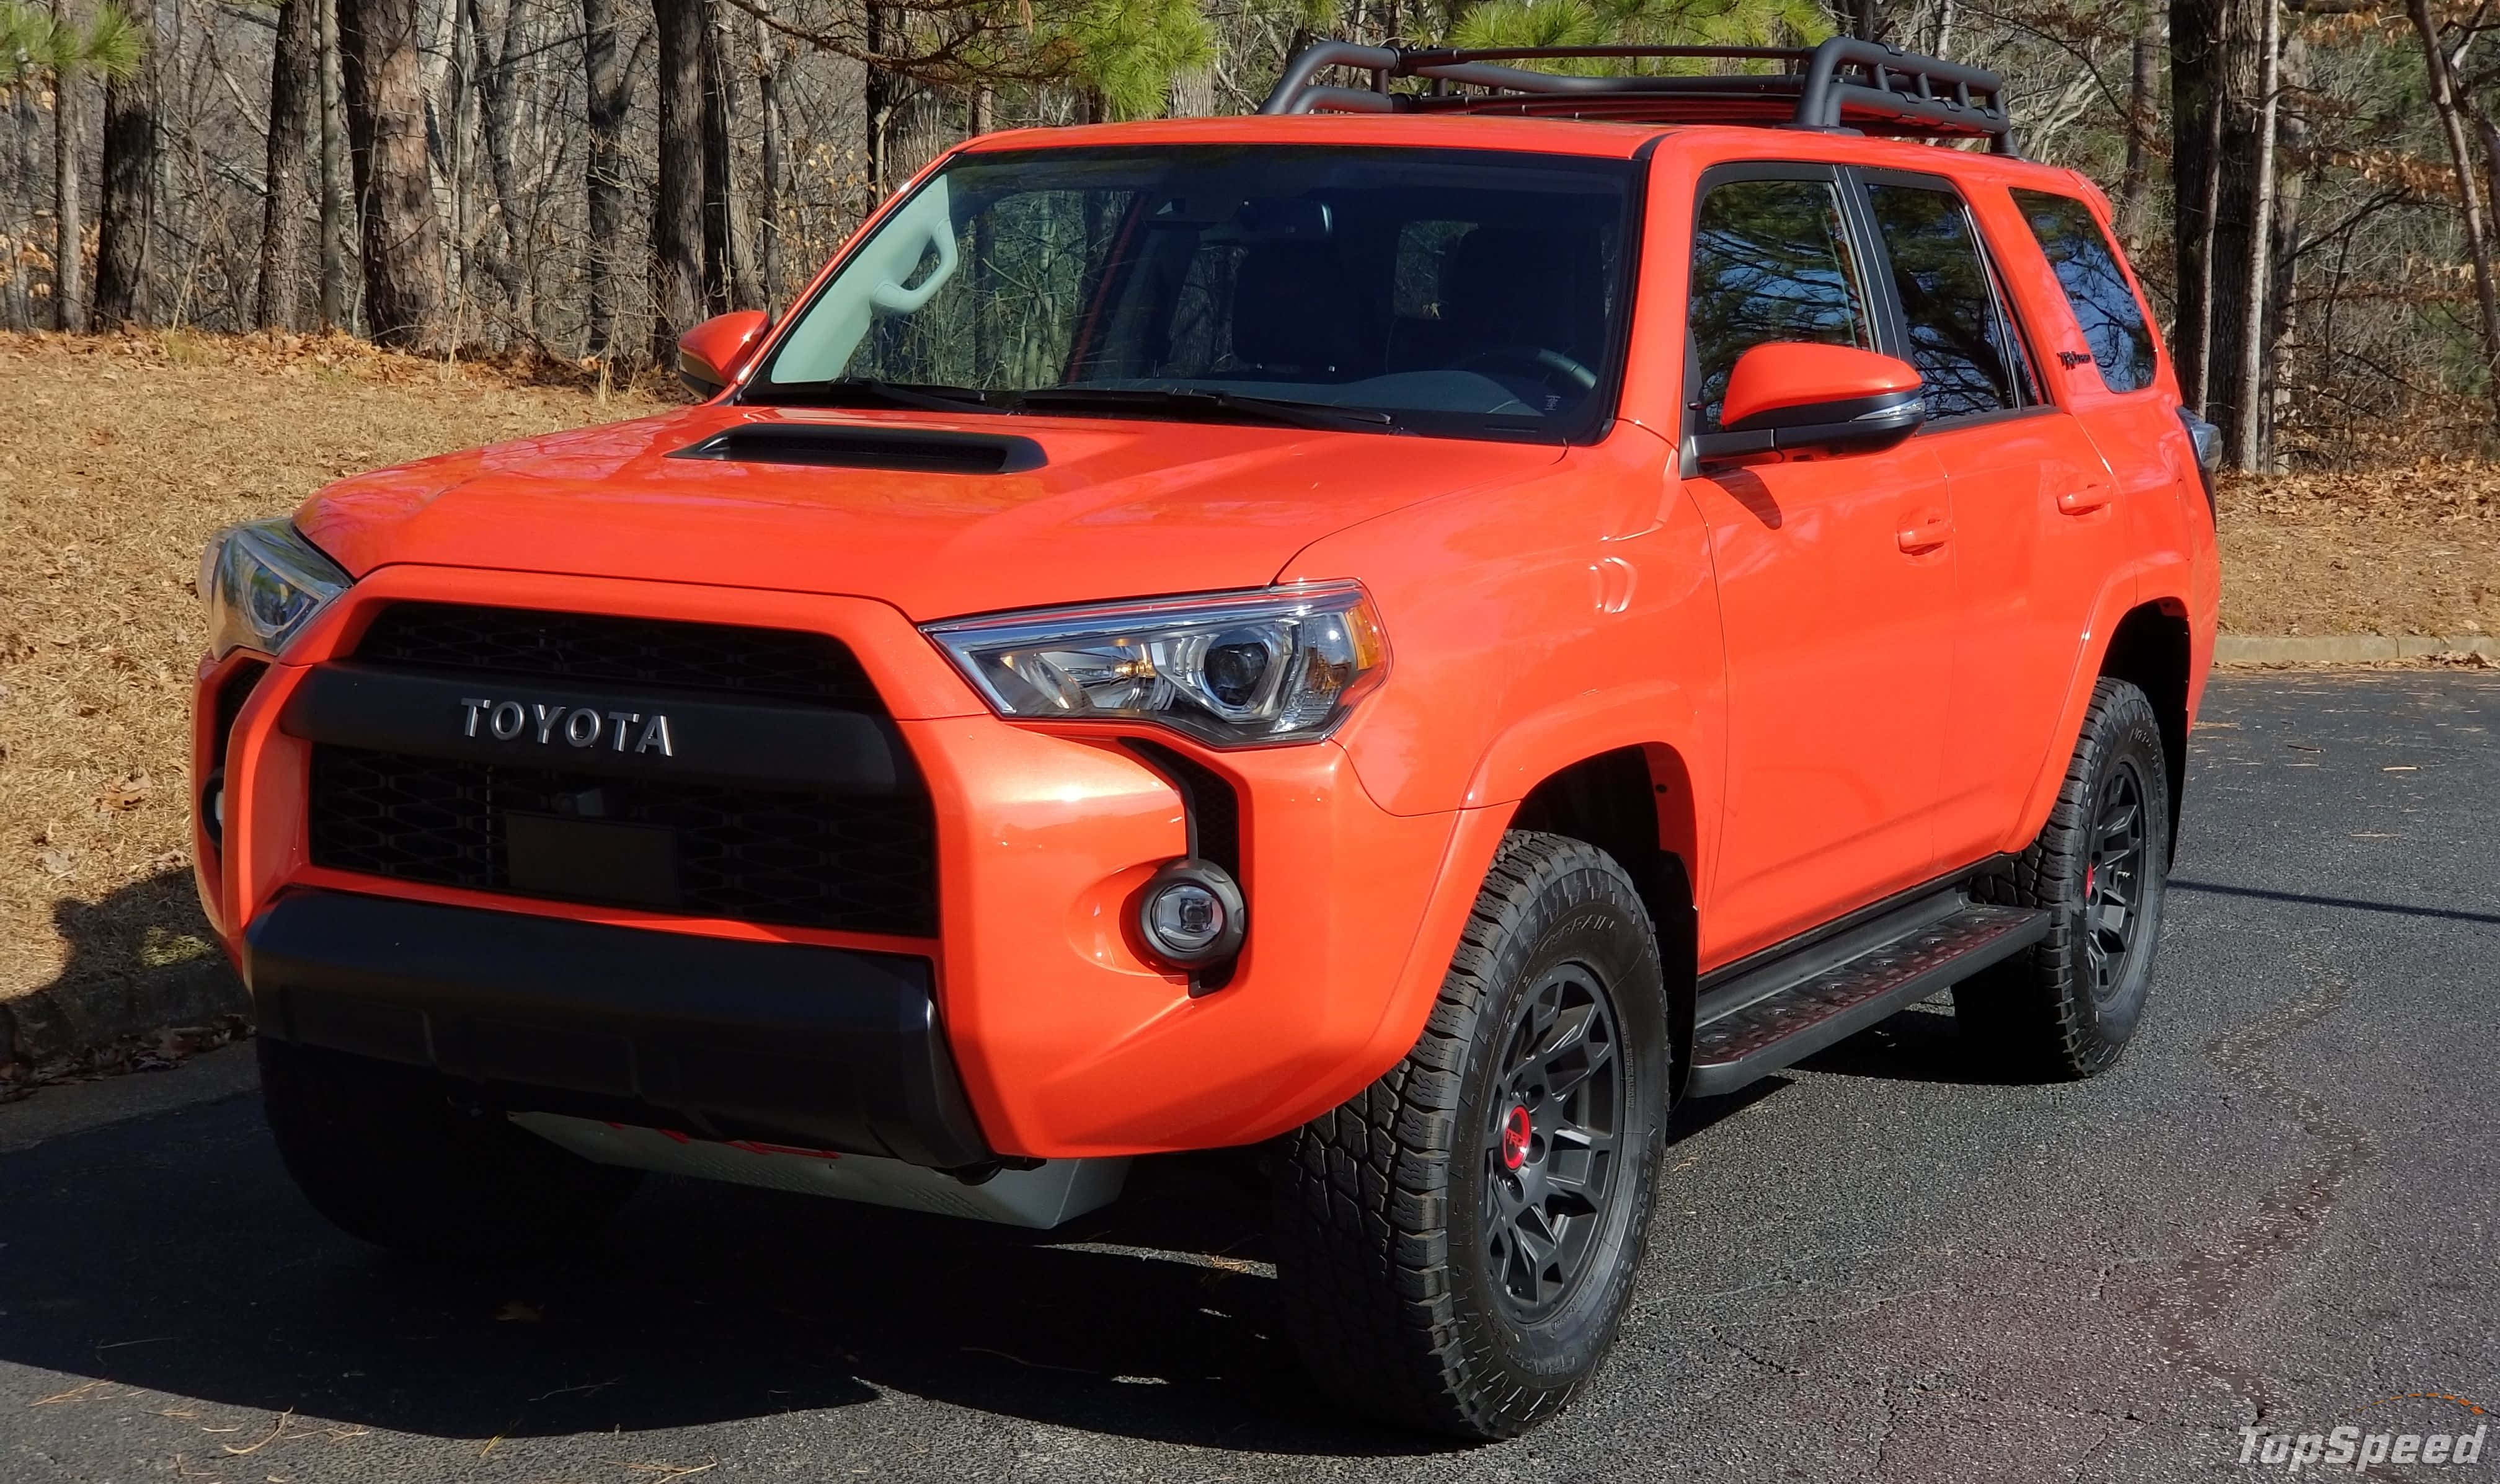 Download The Orange Toyota 4runner Is Parked On The Road